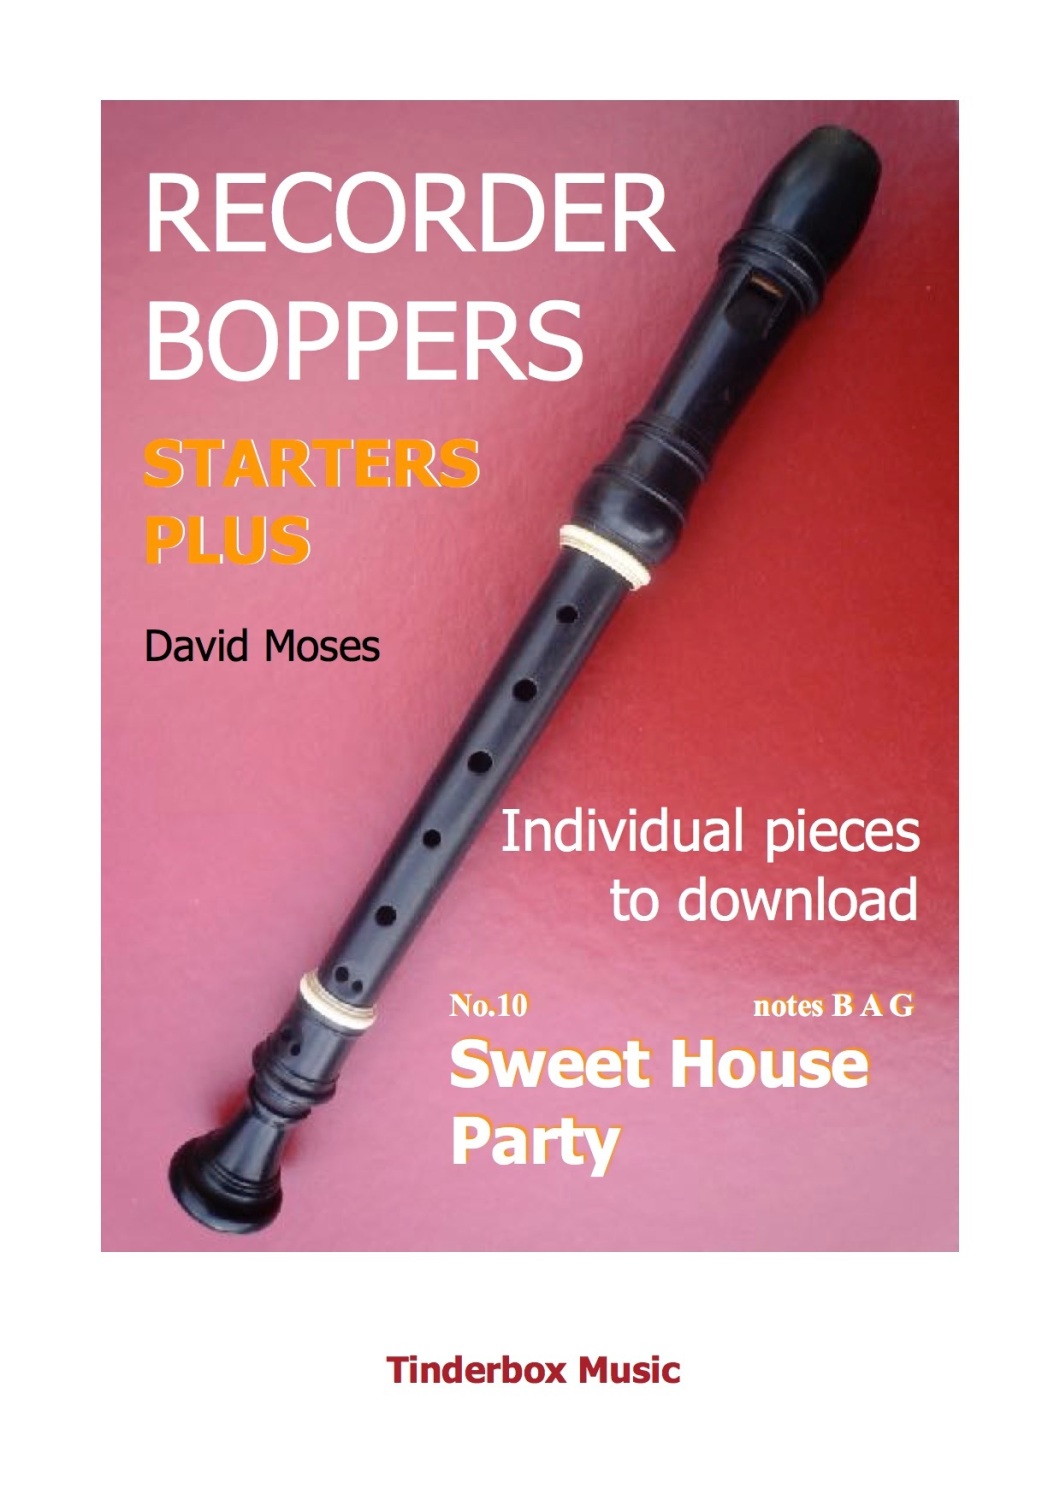 STARTERS PLUS individual pieces no.10 SWEET HOUSE PARTY  download